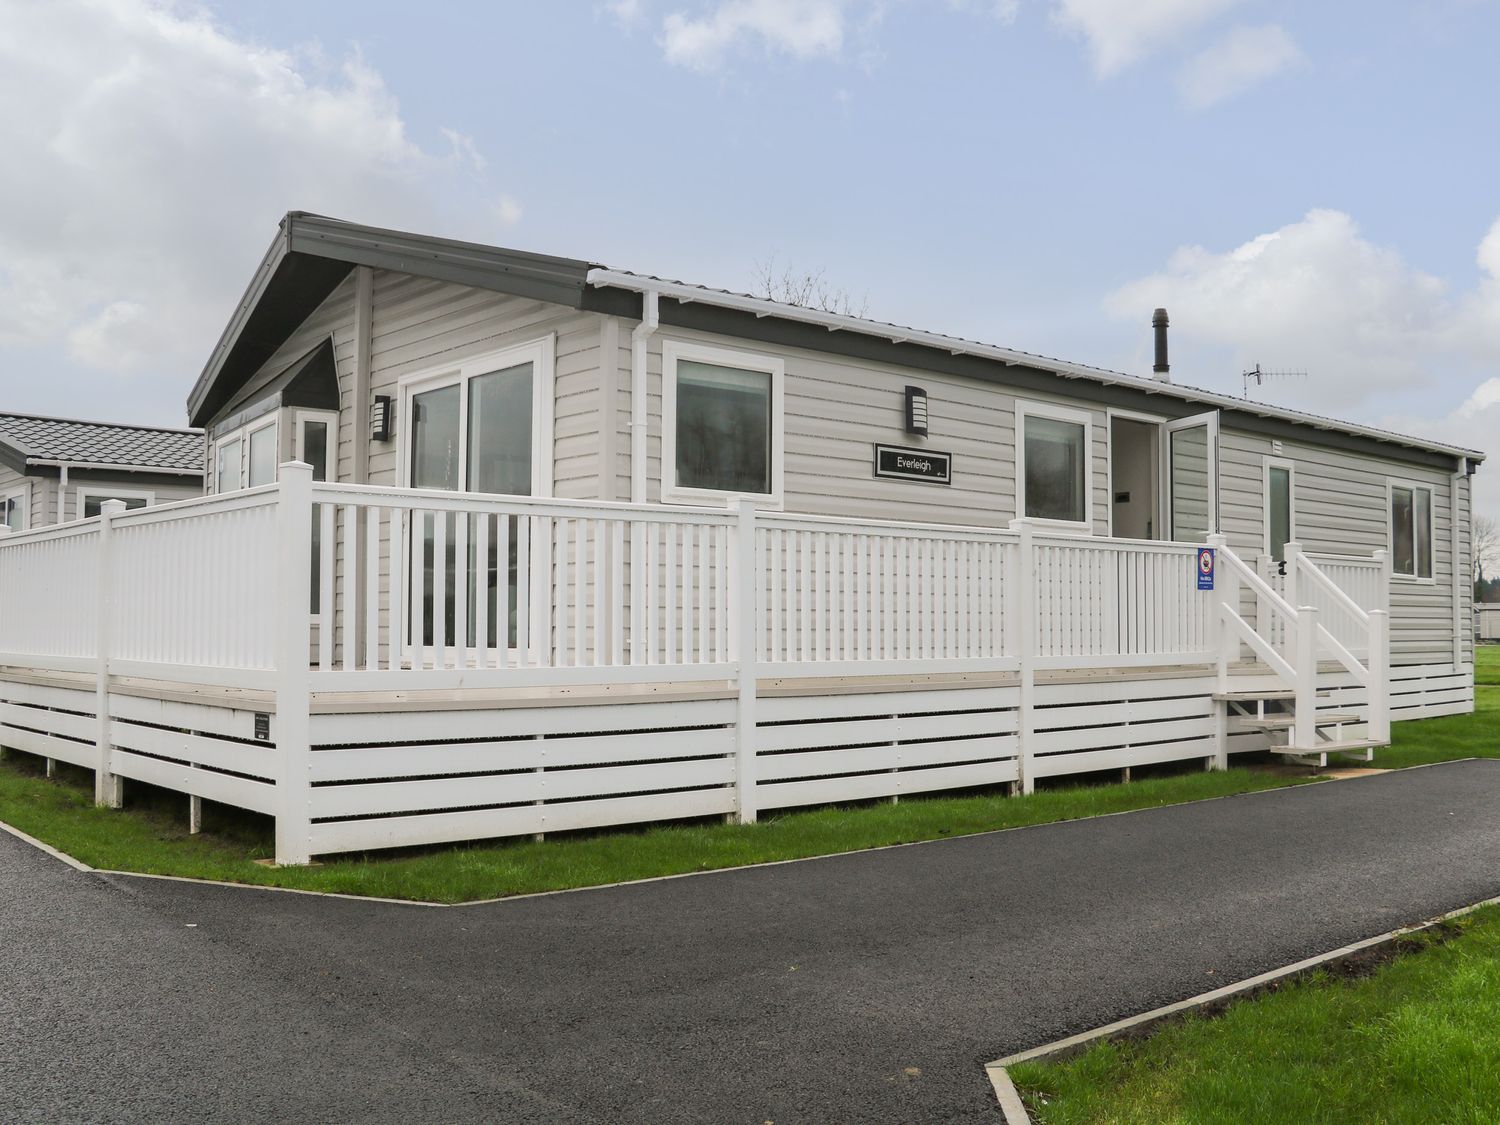 Lodge at Chichester Lakeside (2 Bed) - Kent & Sussex - 1094583 - photo 1